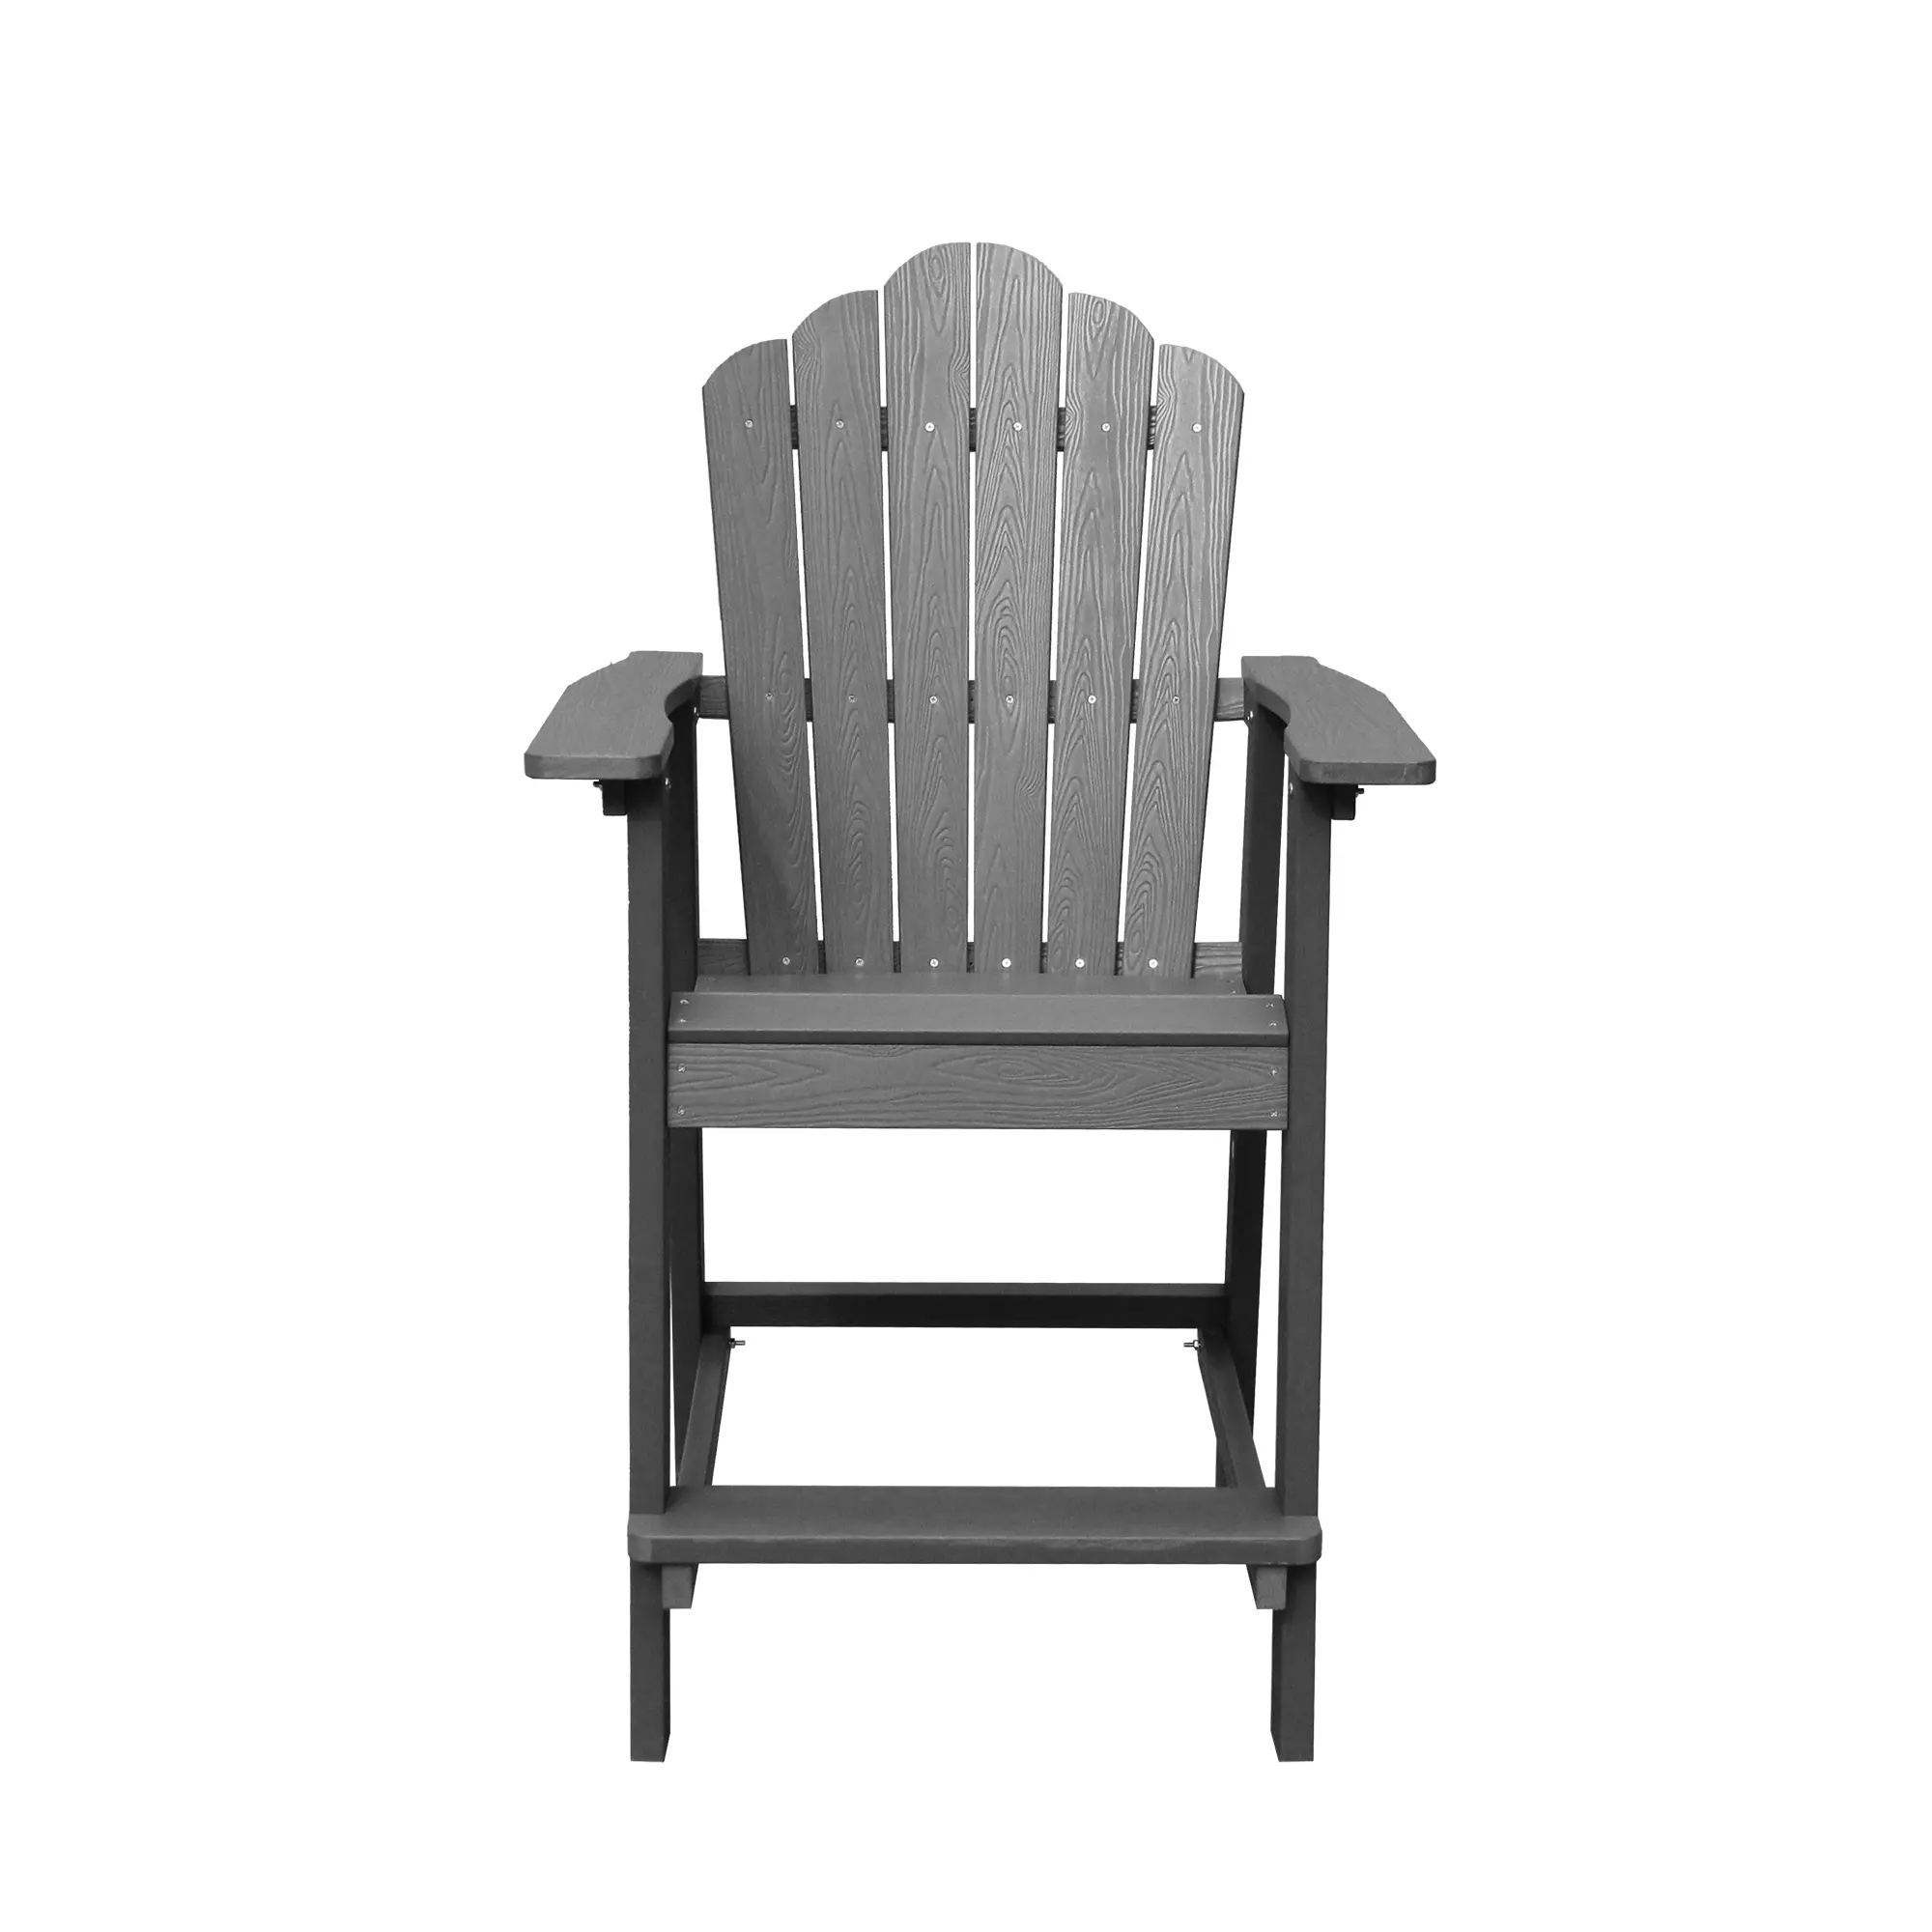 Outdoor Tall Adirondack Chair Bar Stool for Your Deck Front Porch Patio or Balcony Grey